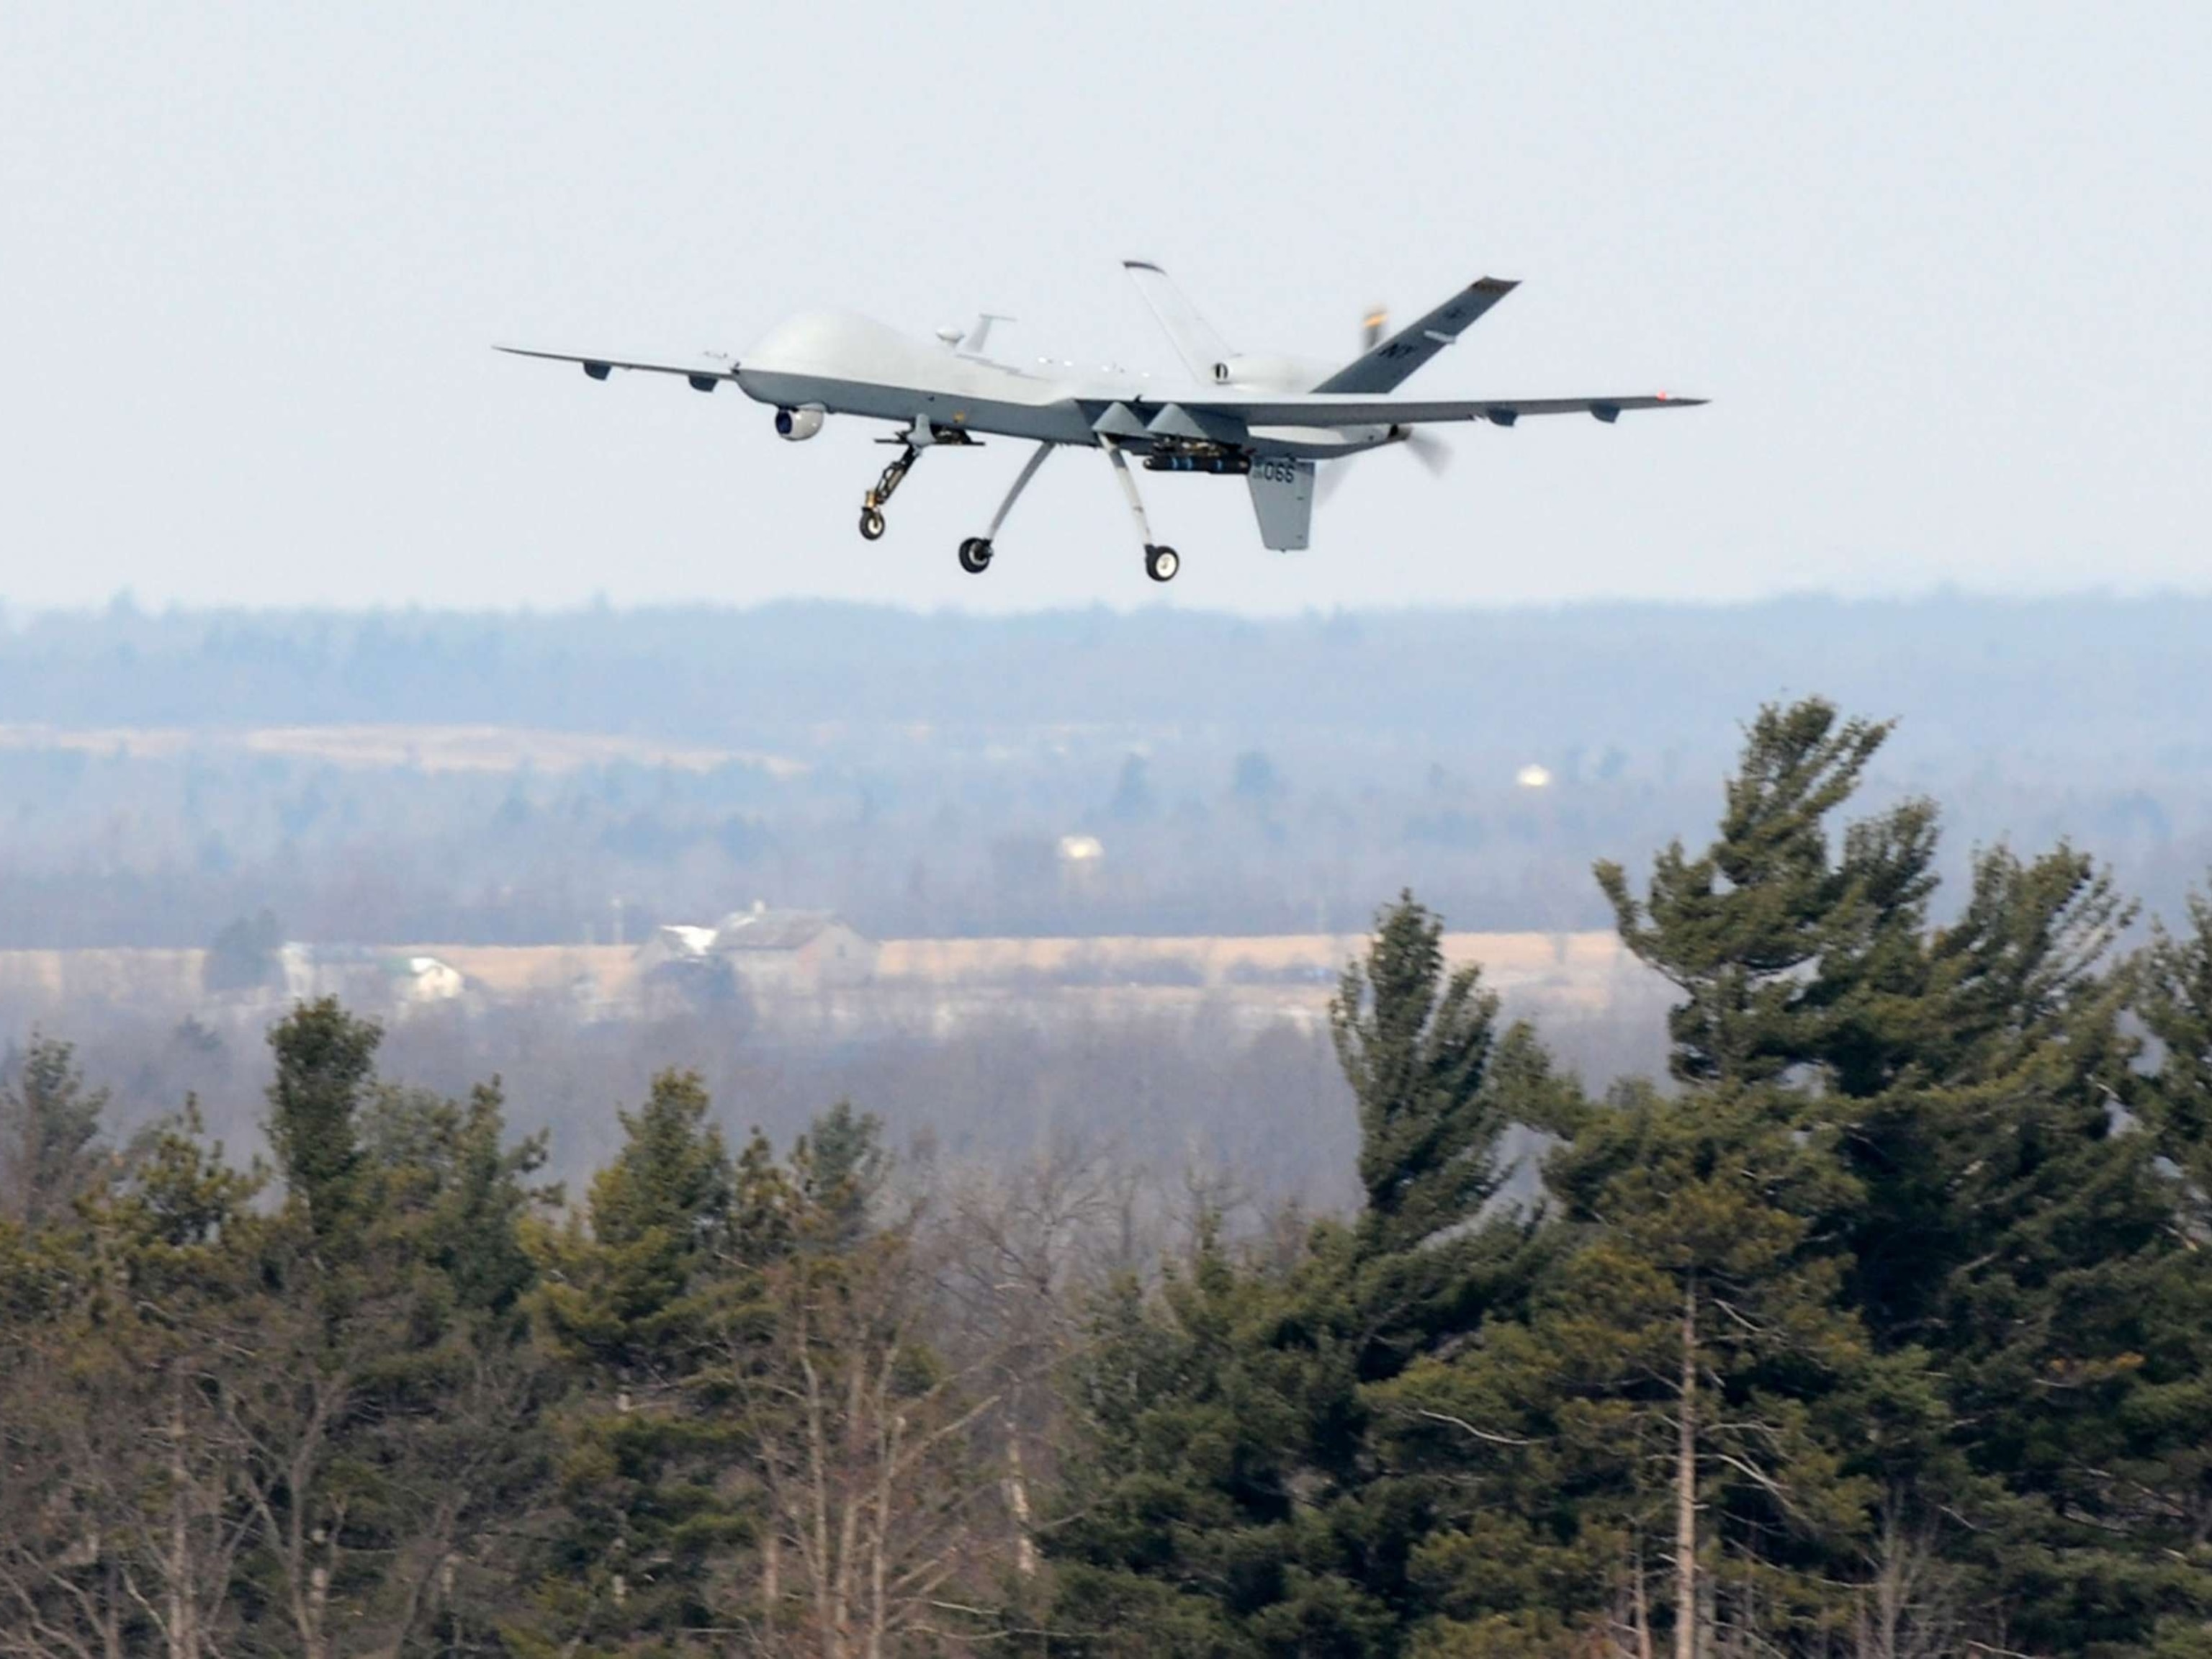 PHOTO: An MQ-9 Reaper takes off at Wheeler-Sack Army Air Field in Fort Drum, N.Y., Feb. 14, 2012.